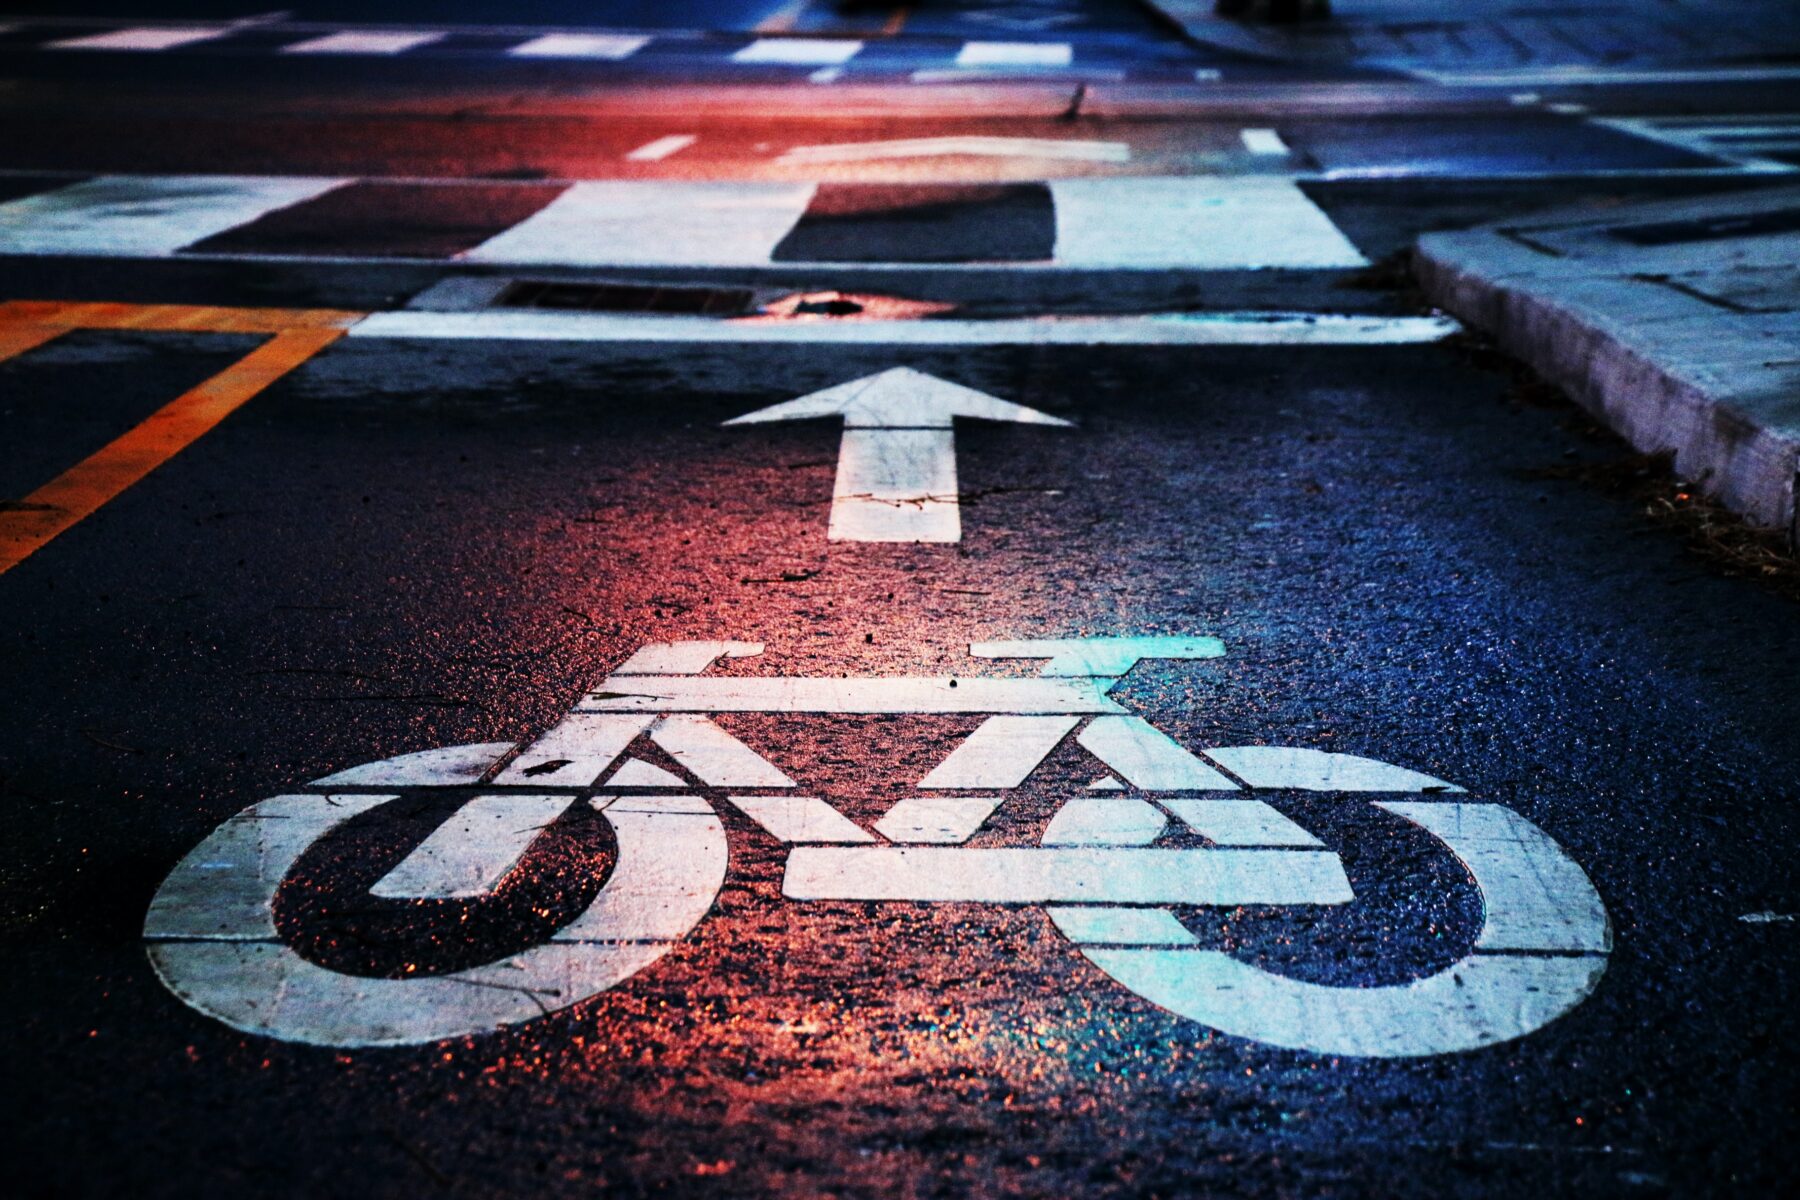 A bike lane intersecting a cross walk, with a white bicycle painted on the black asphalt